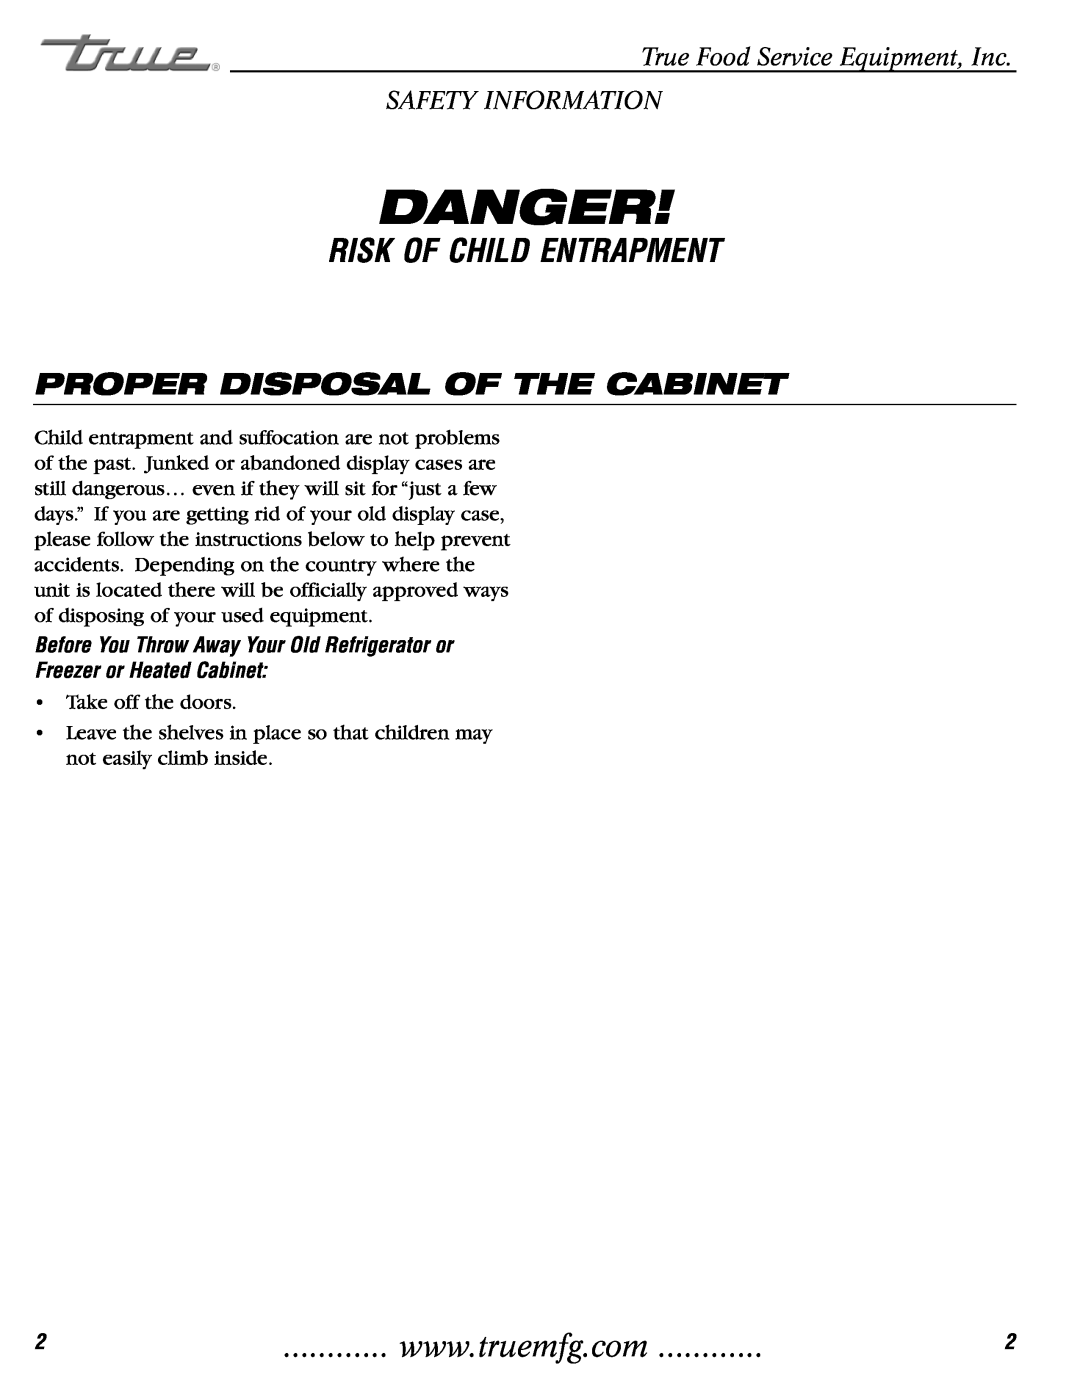 True Manufacturing Company TH Proper Disposal Of The Cabinet, Before You Throw Away Your Old Refrigerator or, Danger 